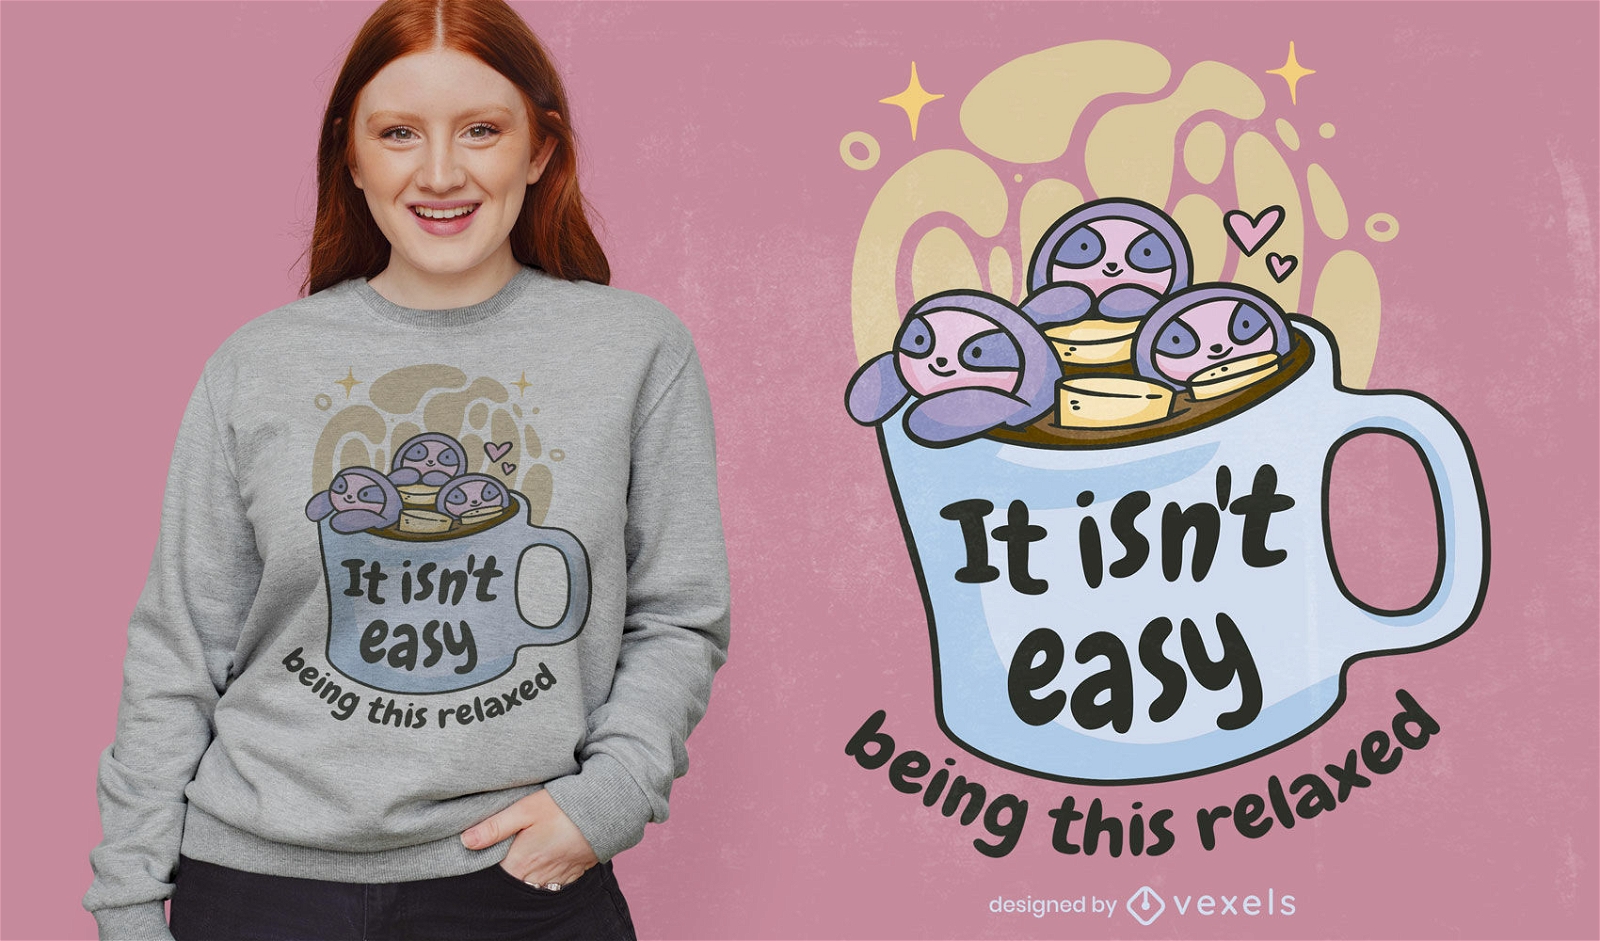 Sloths in a mug funny quote t-shirt design